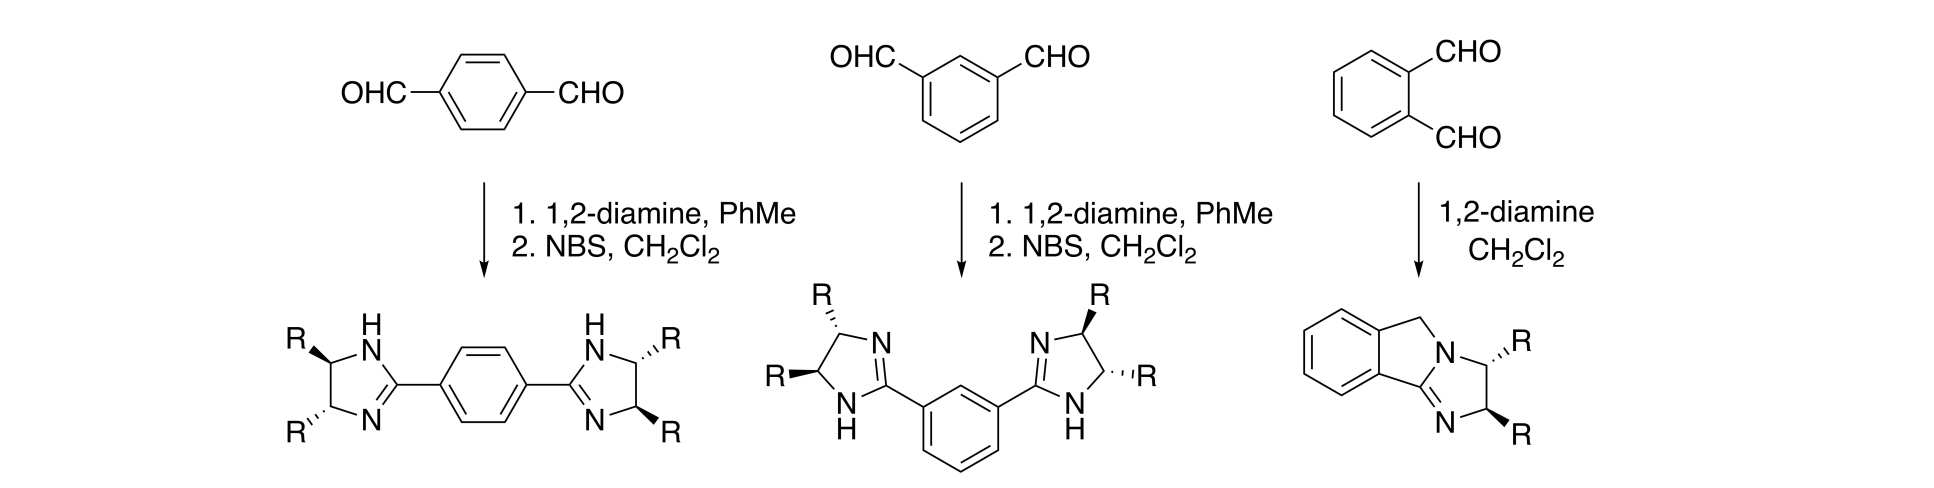 The Reaction of Aromatic Dialdehydes with Enantiopure 1,2-Diamines - an Expeditious Route to Enantiopure Tricyclic Amidines